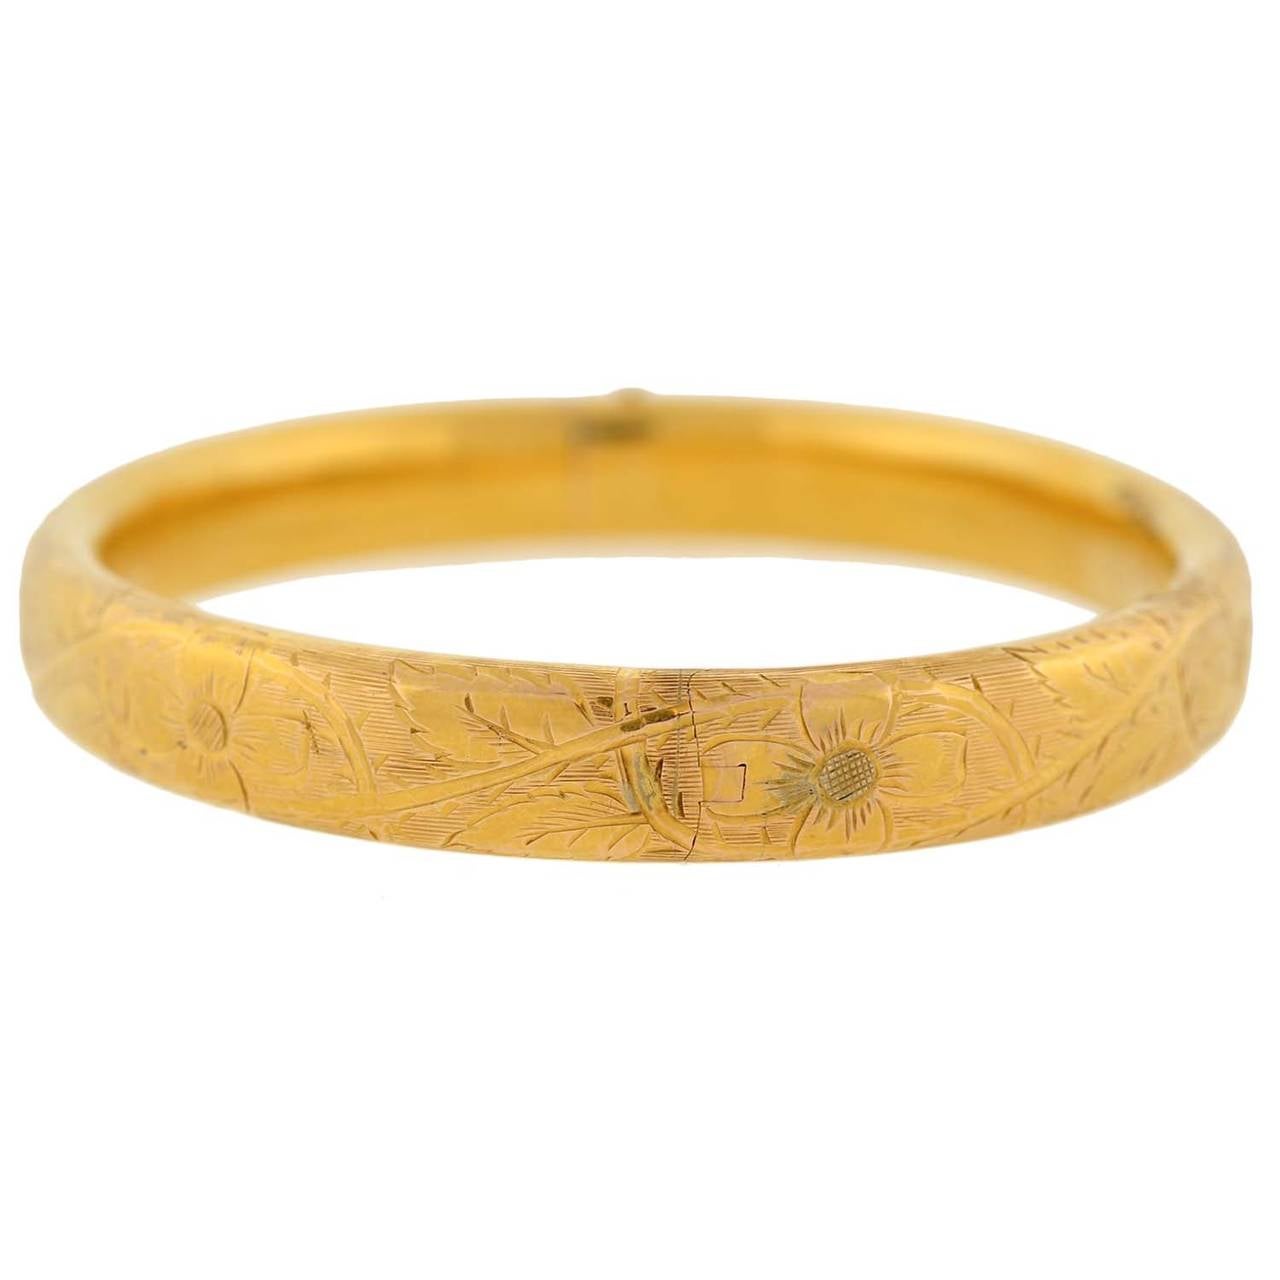 A gorgeous gold bangle bracelet from the Victorian (ca1880) period! This stunning piece is made of 14kt yellow gold and has a flowing floral etched design covering the entire outer surface. The beautiful etching adds texture and depth to the piece,